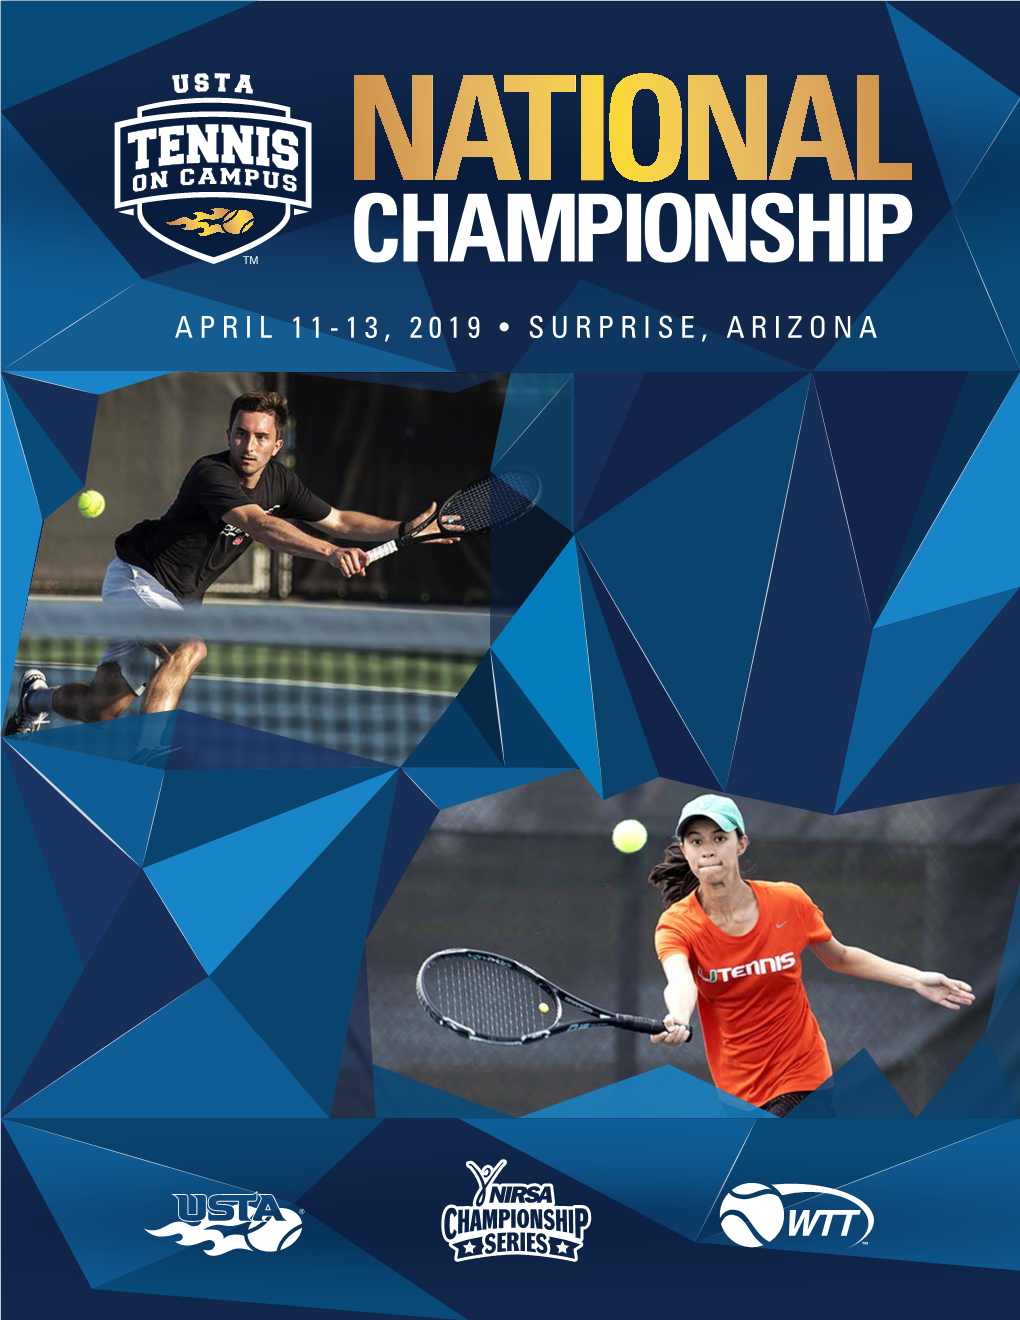 APRIL 11-13, 2019 • SURPRISE, ARIZONA 2019 USTA Tennis on Campus National Championship Schedule of Events